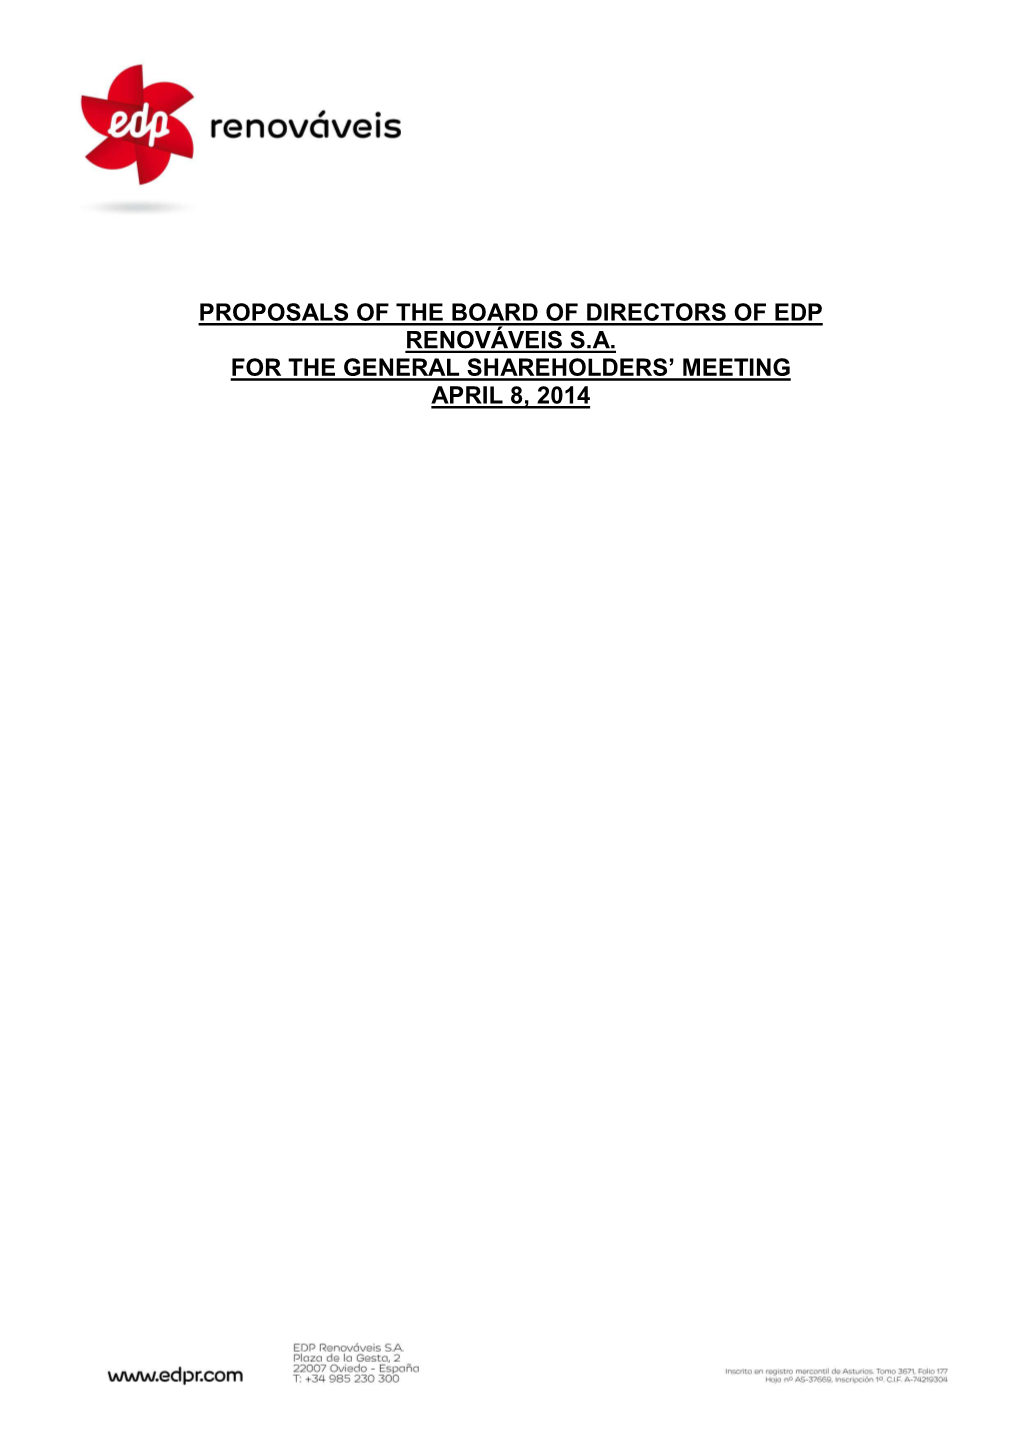 Proposals of the Board of Directors of Edp Renováveis S.A